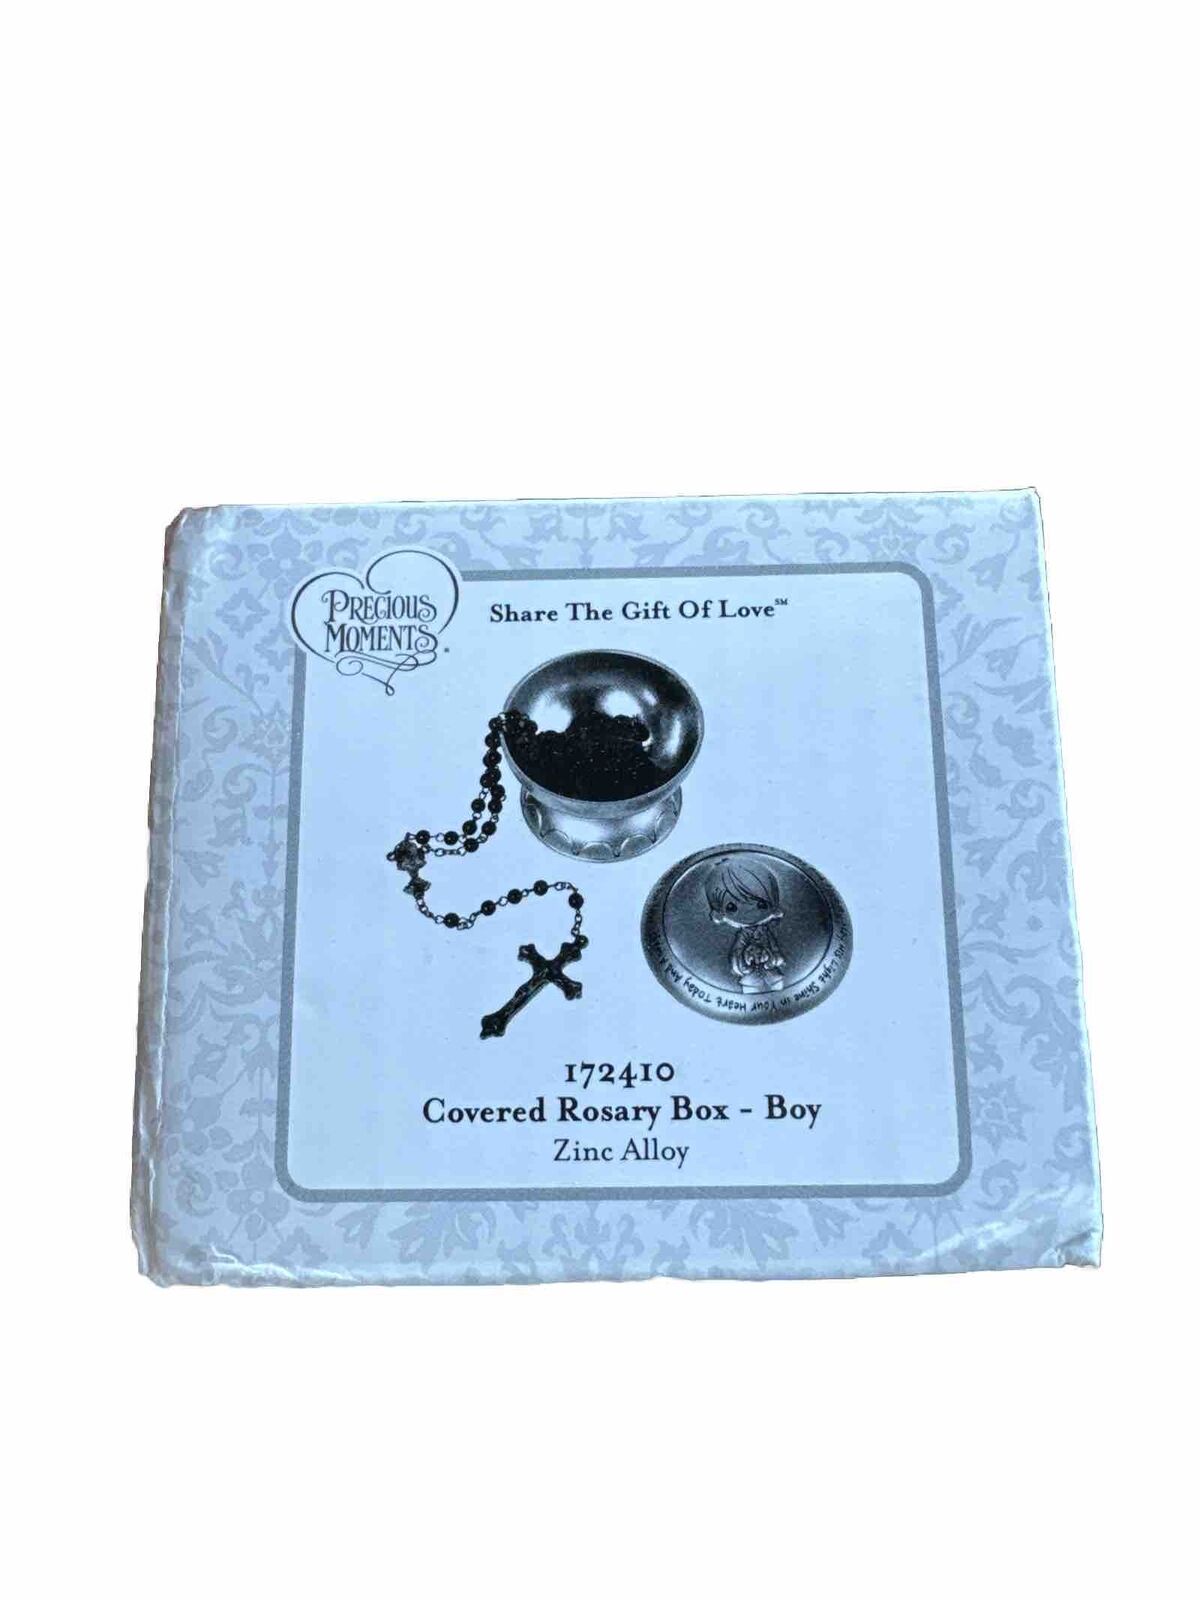 Precious Moments 172410 Share the Gift of Love Covered Rosary Box Boy Easter